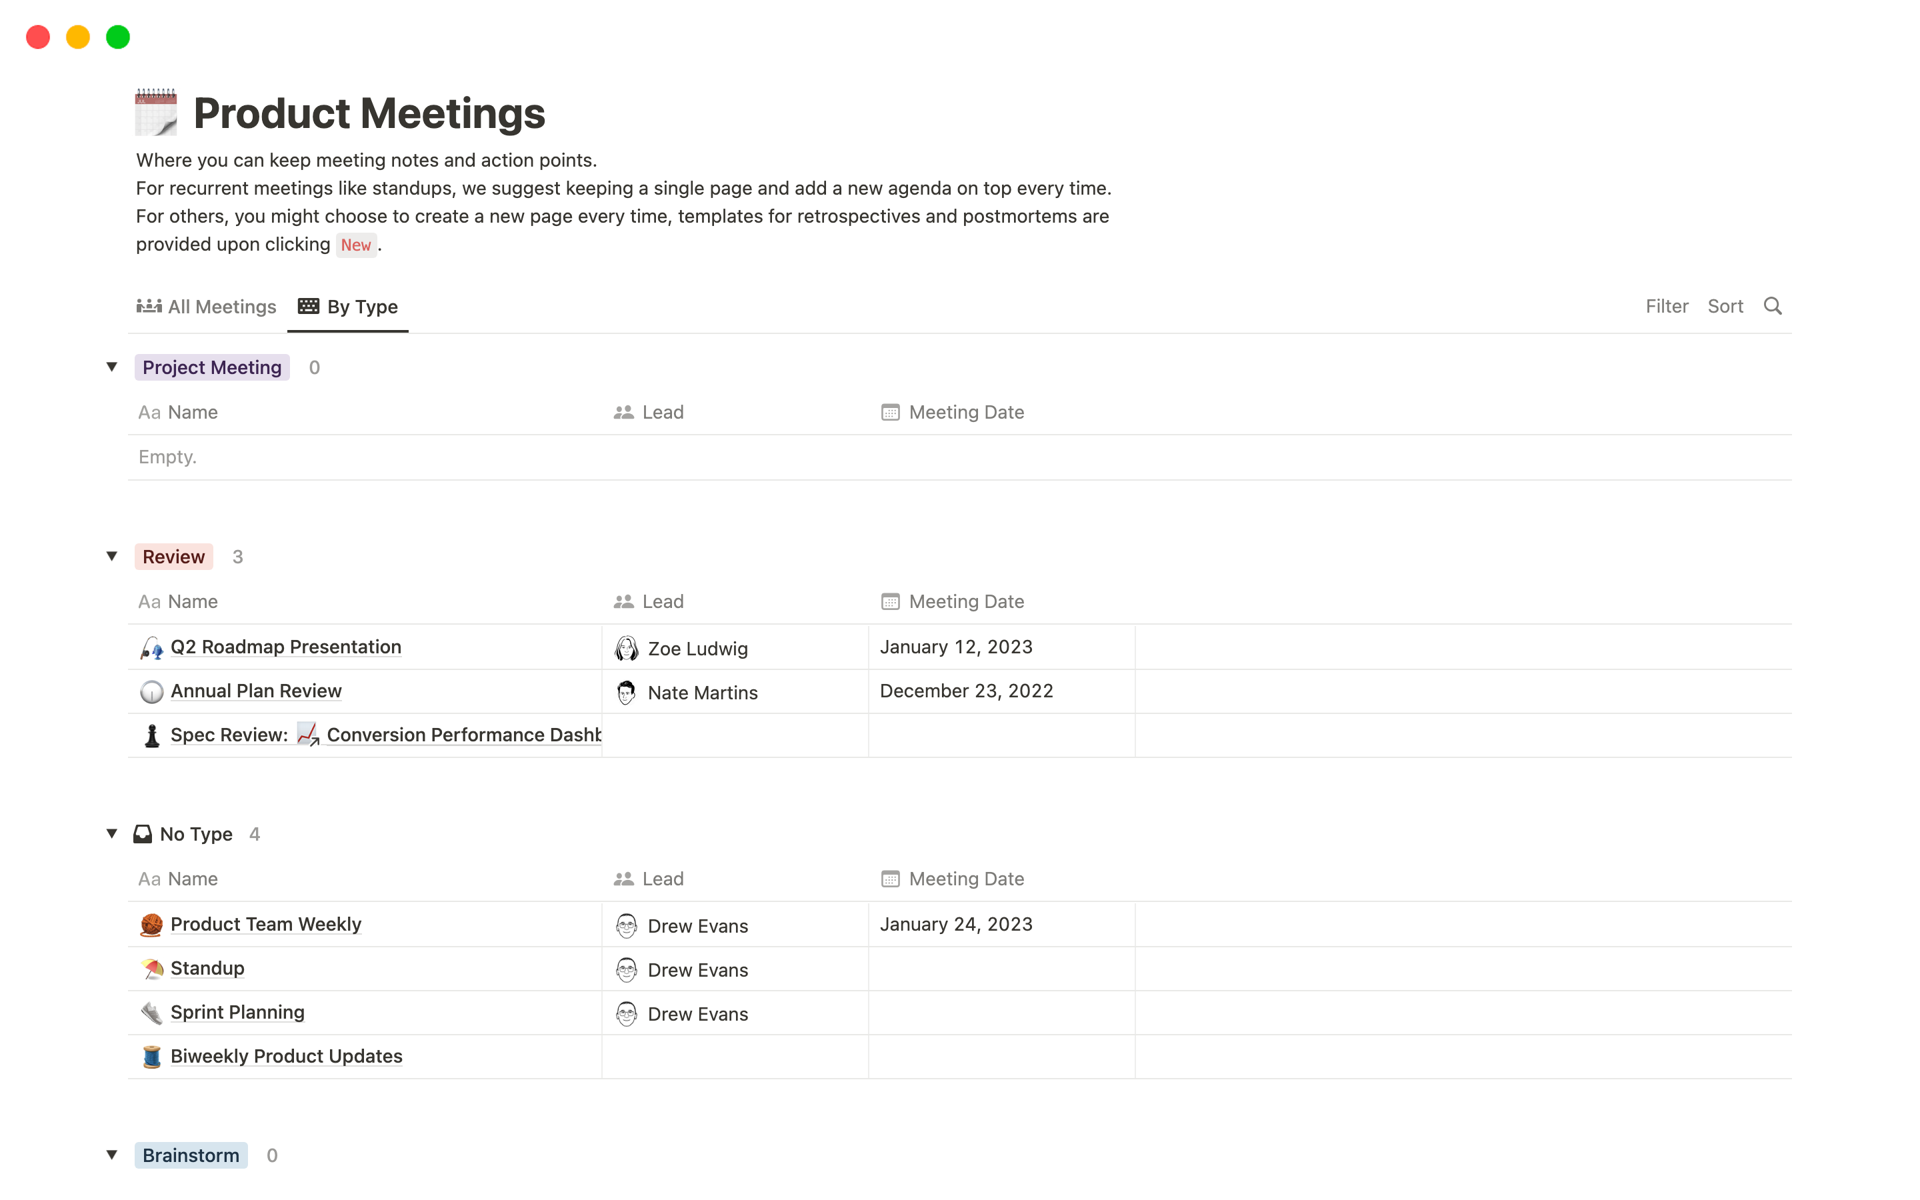 All-in-one set of meeting templates for all your product development needs.